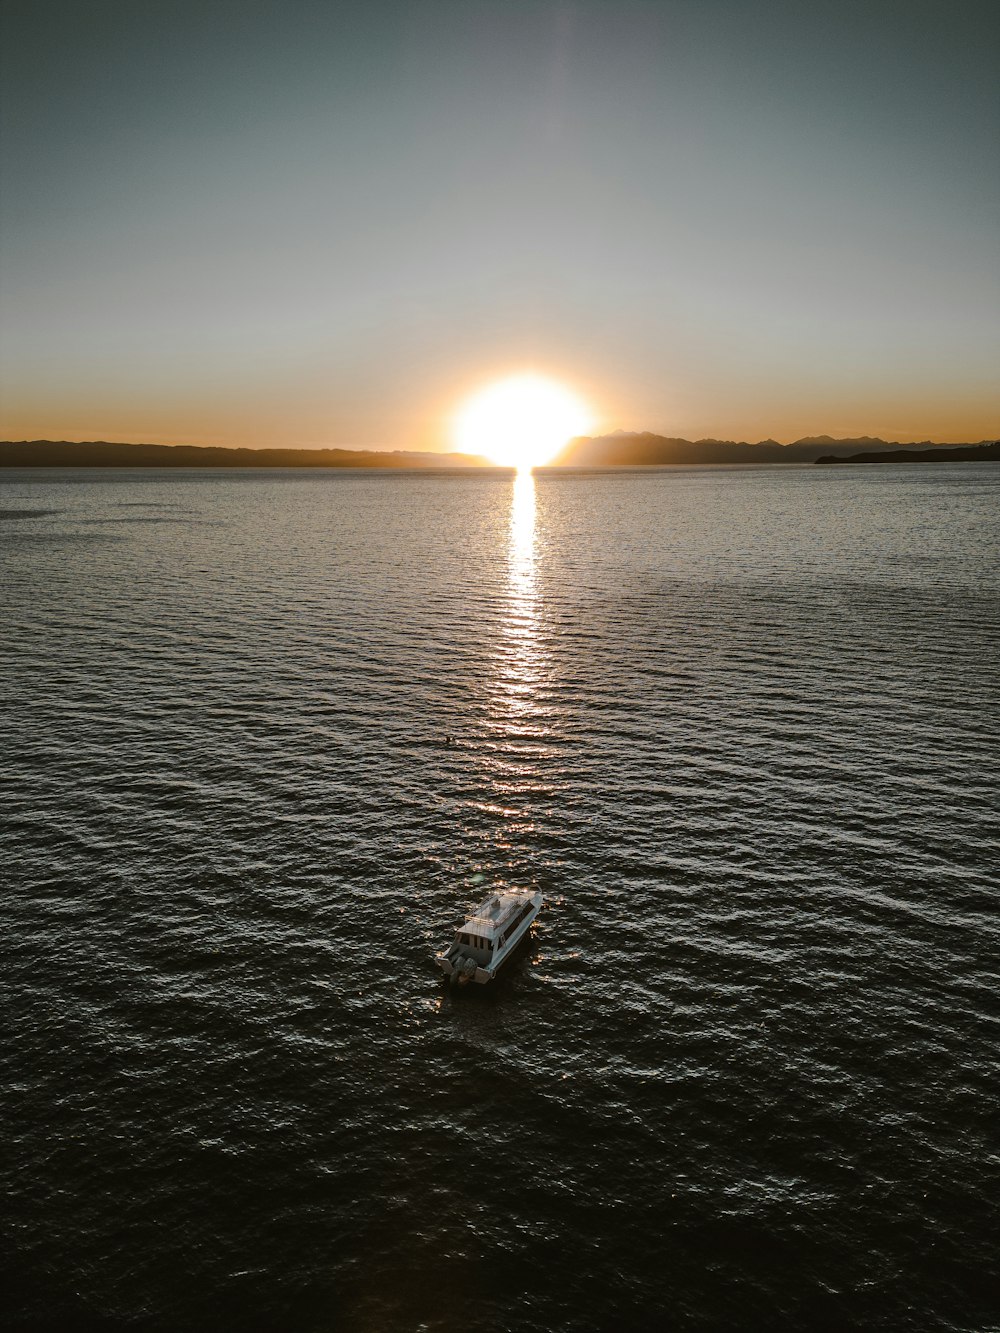 a boat floating on top of a large body of water